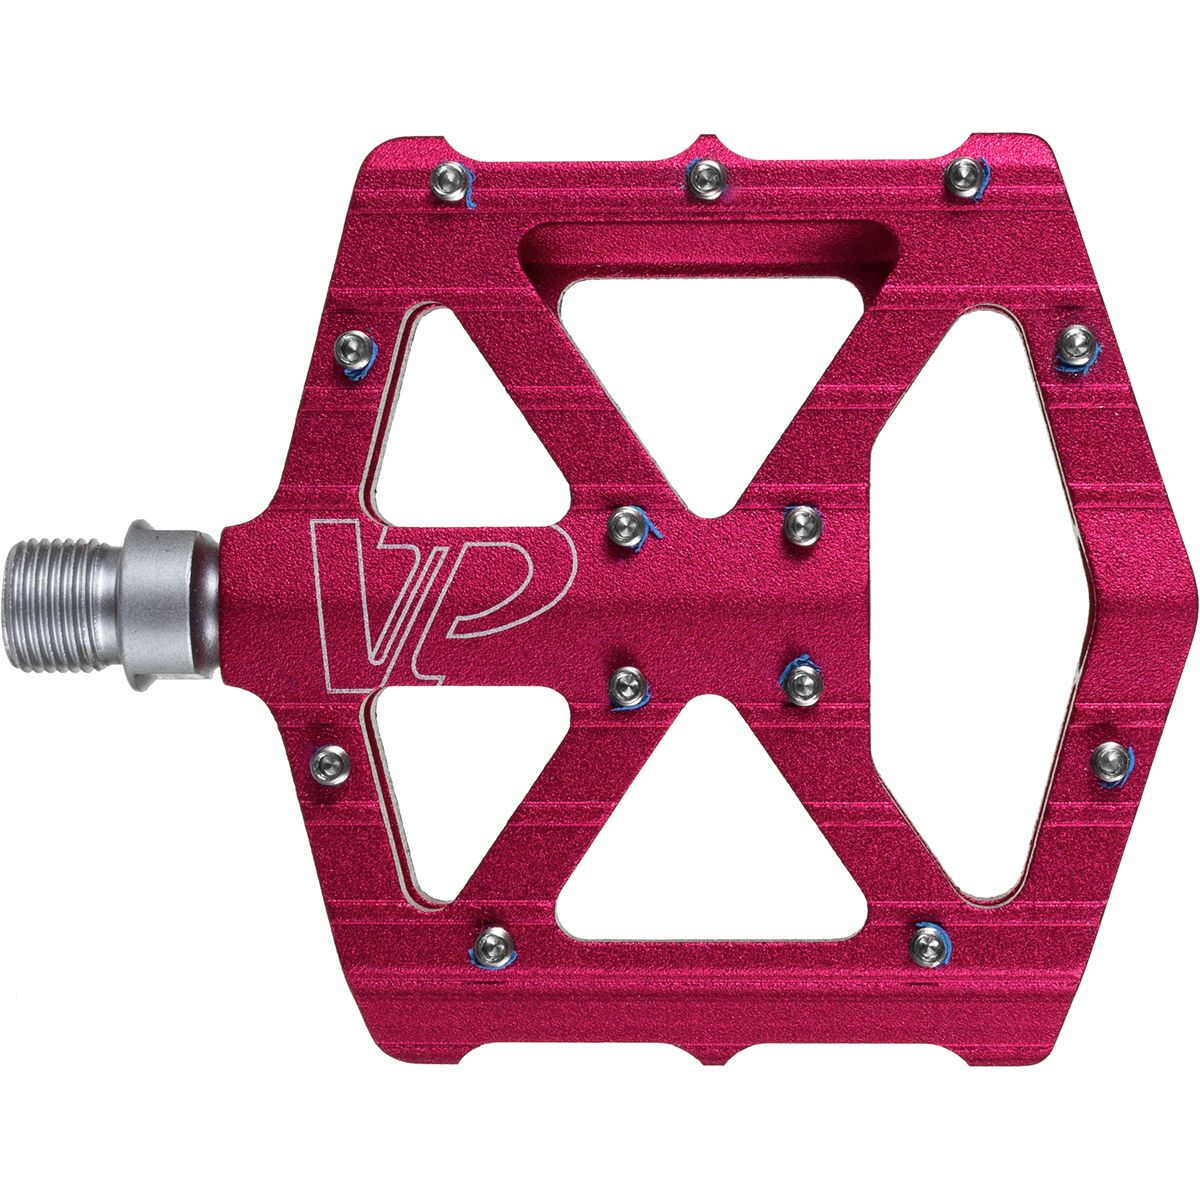 VP Components VP-001 Pedal Red, One Size